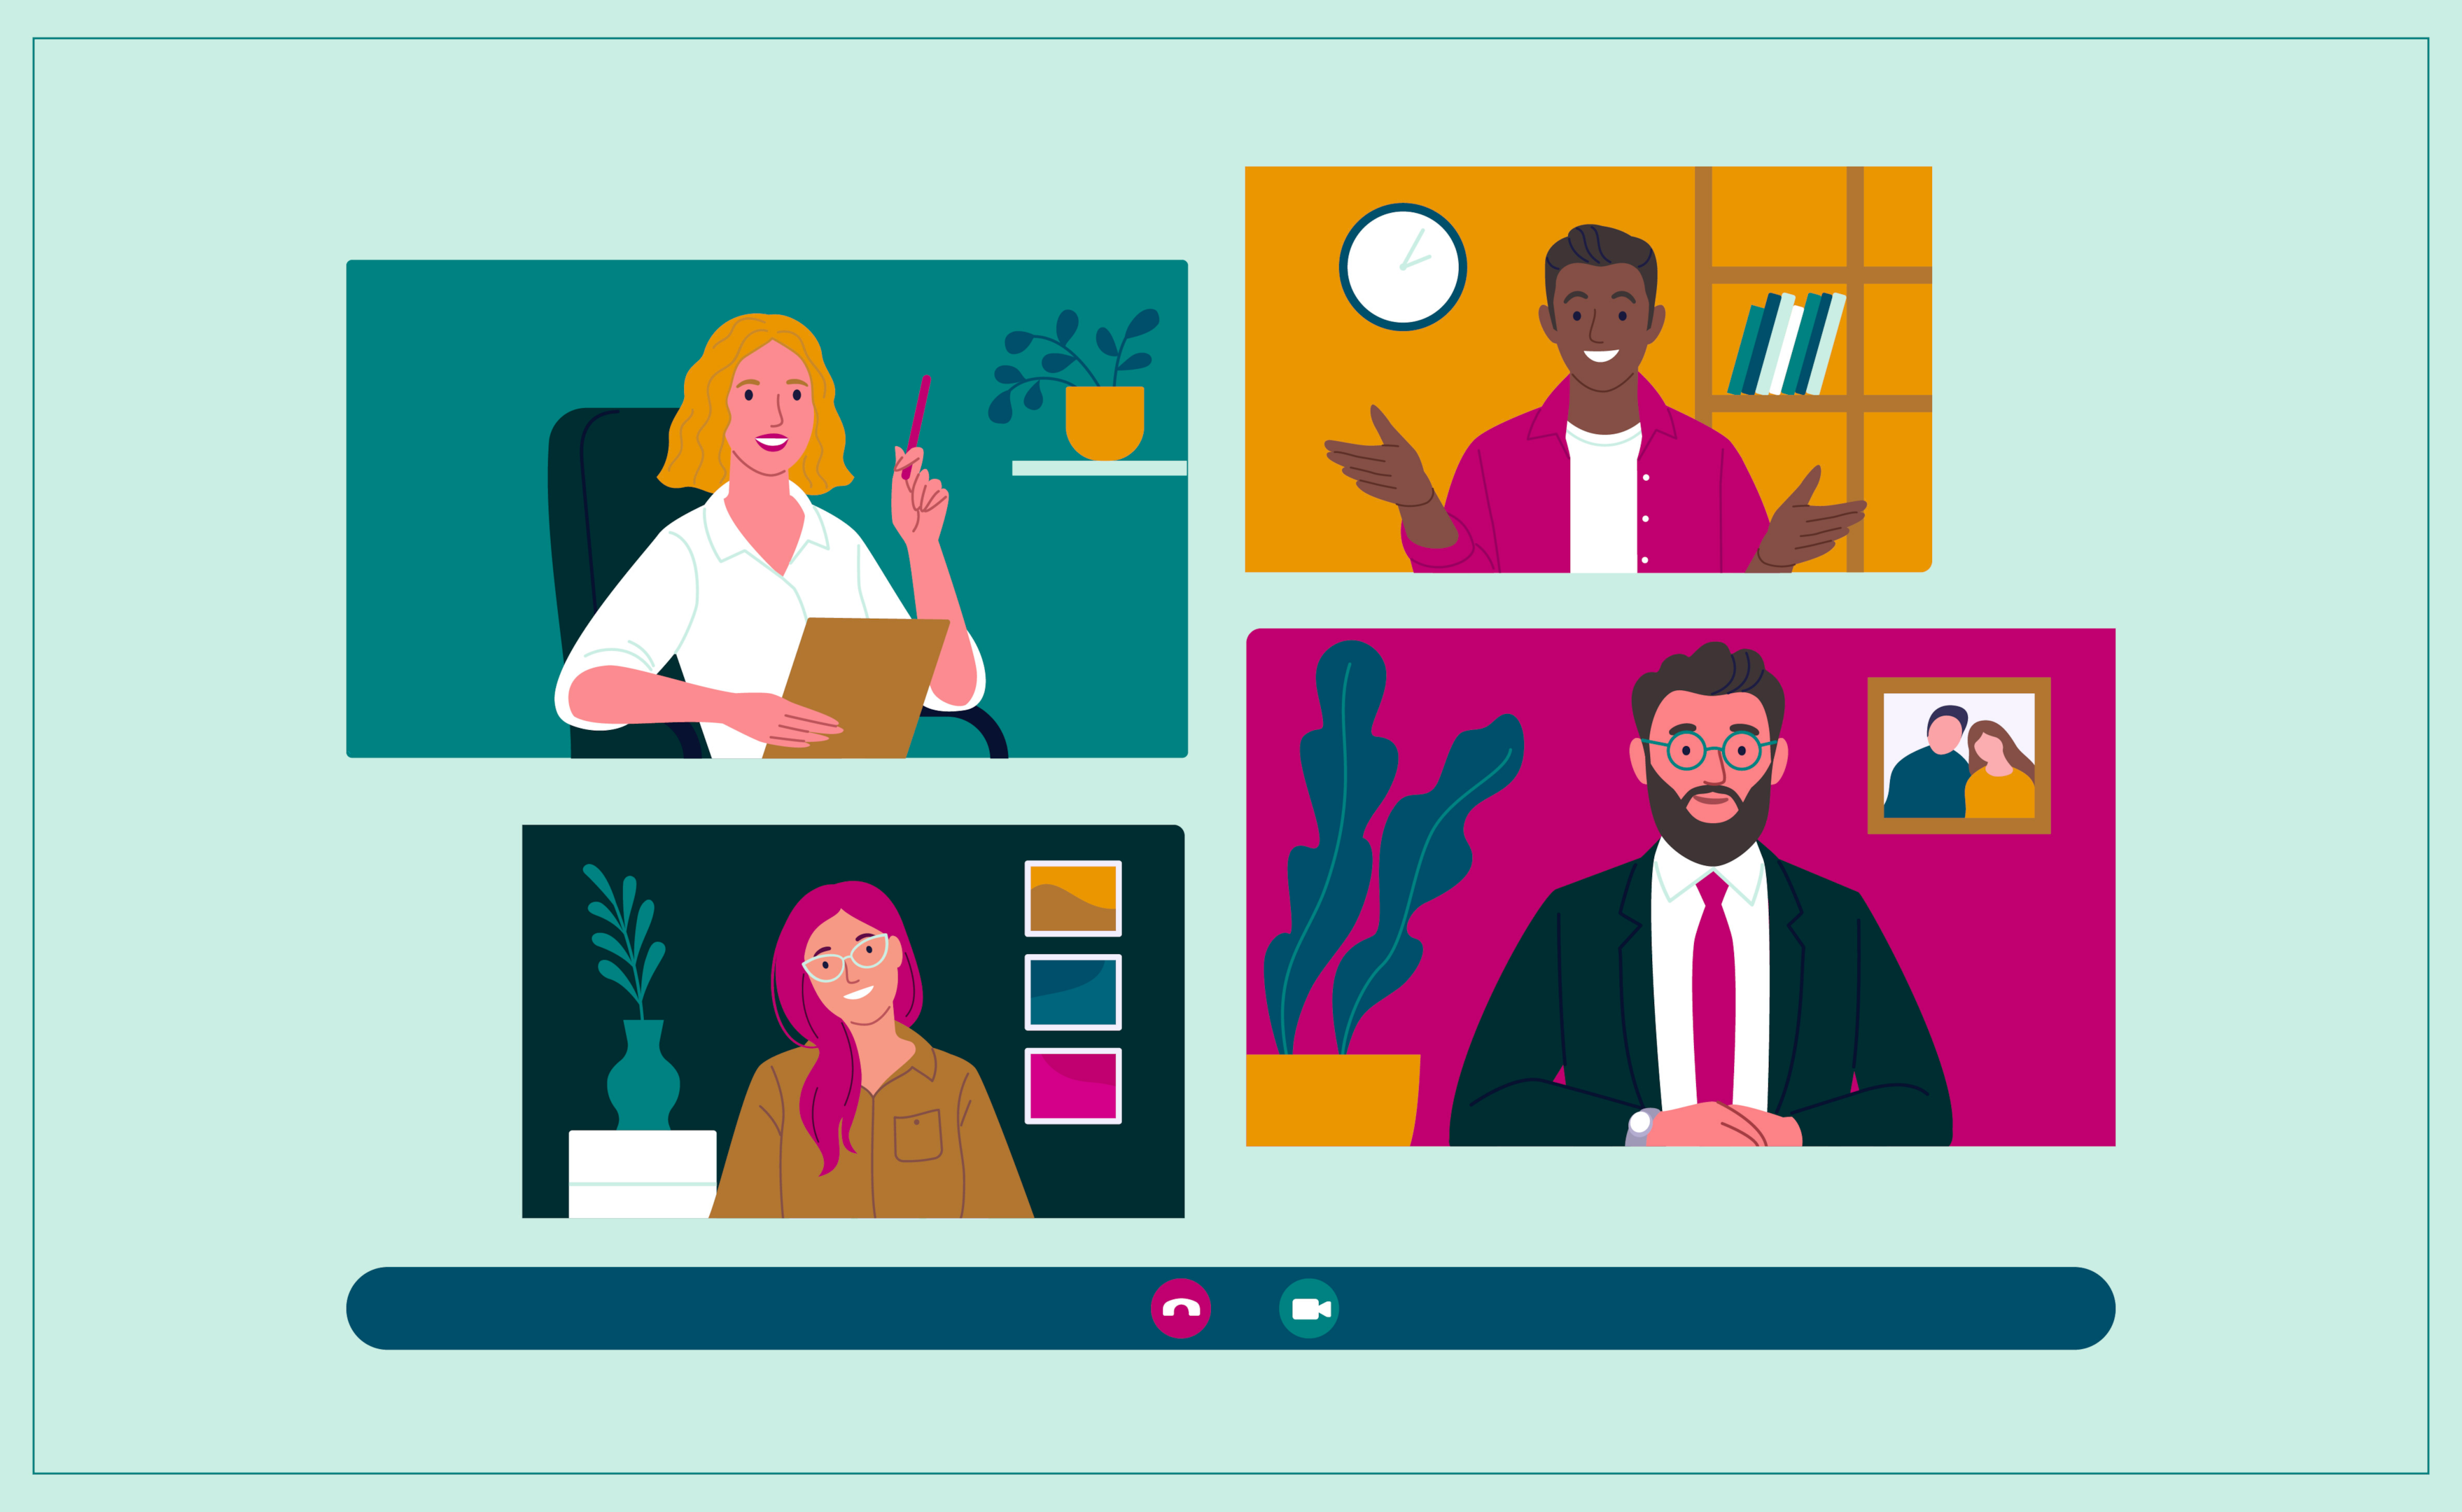 managing remote employees via Google Meet, a video conferencing tool